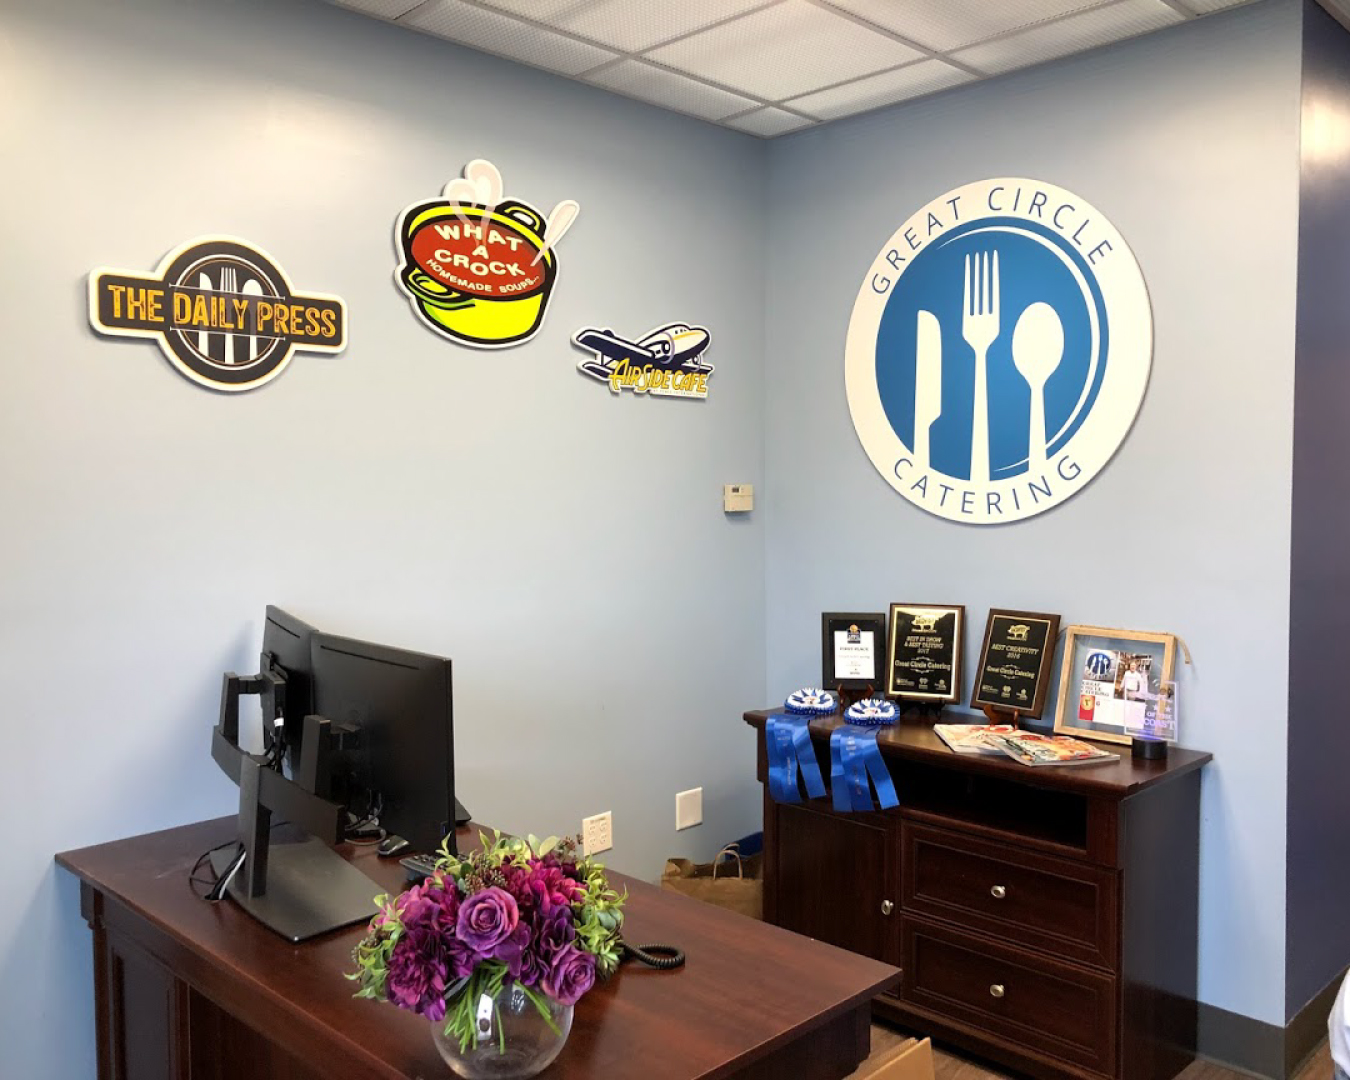 Great Circle Catering interior custom cut sign by Alphagraphics Portsmouth